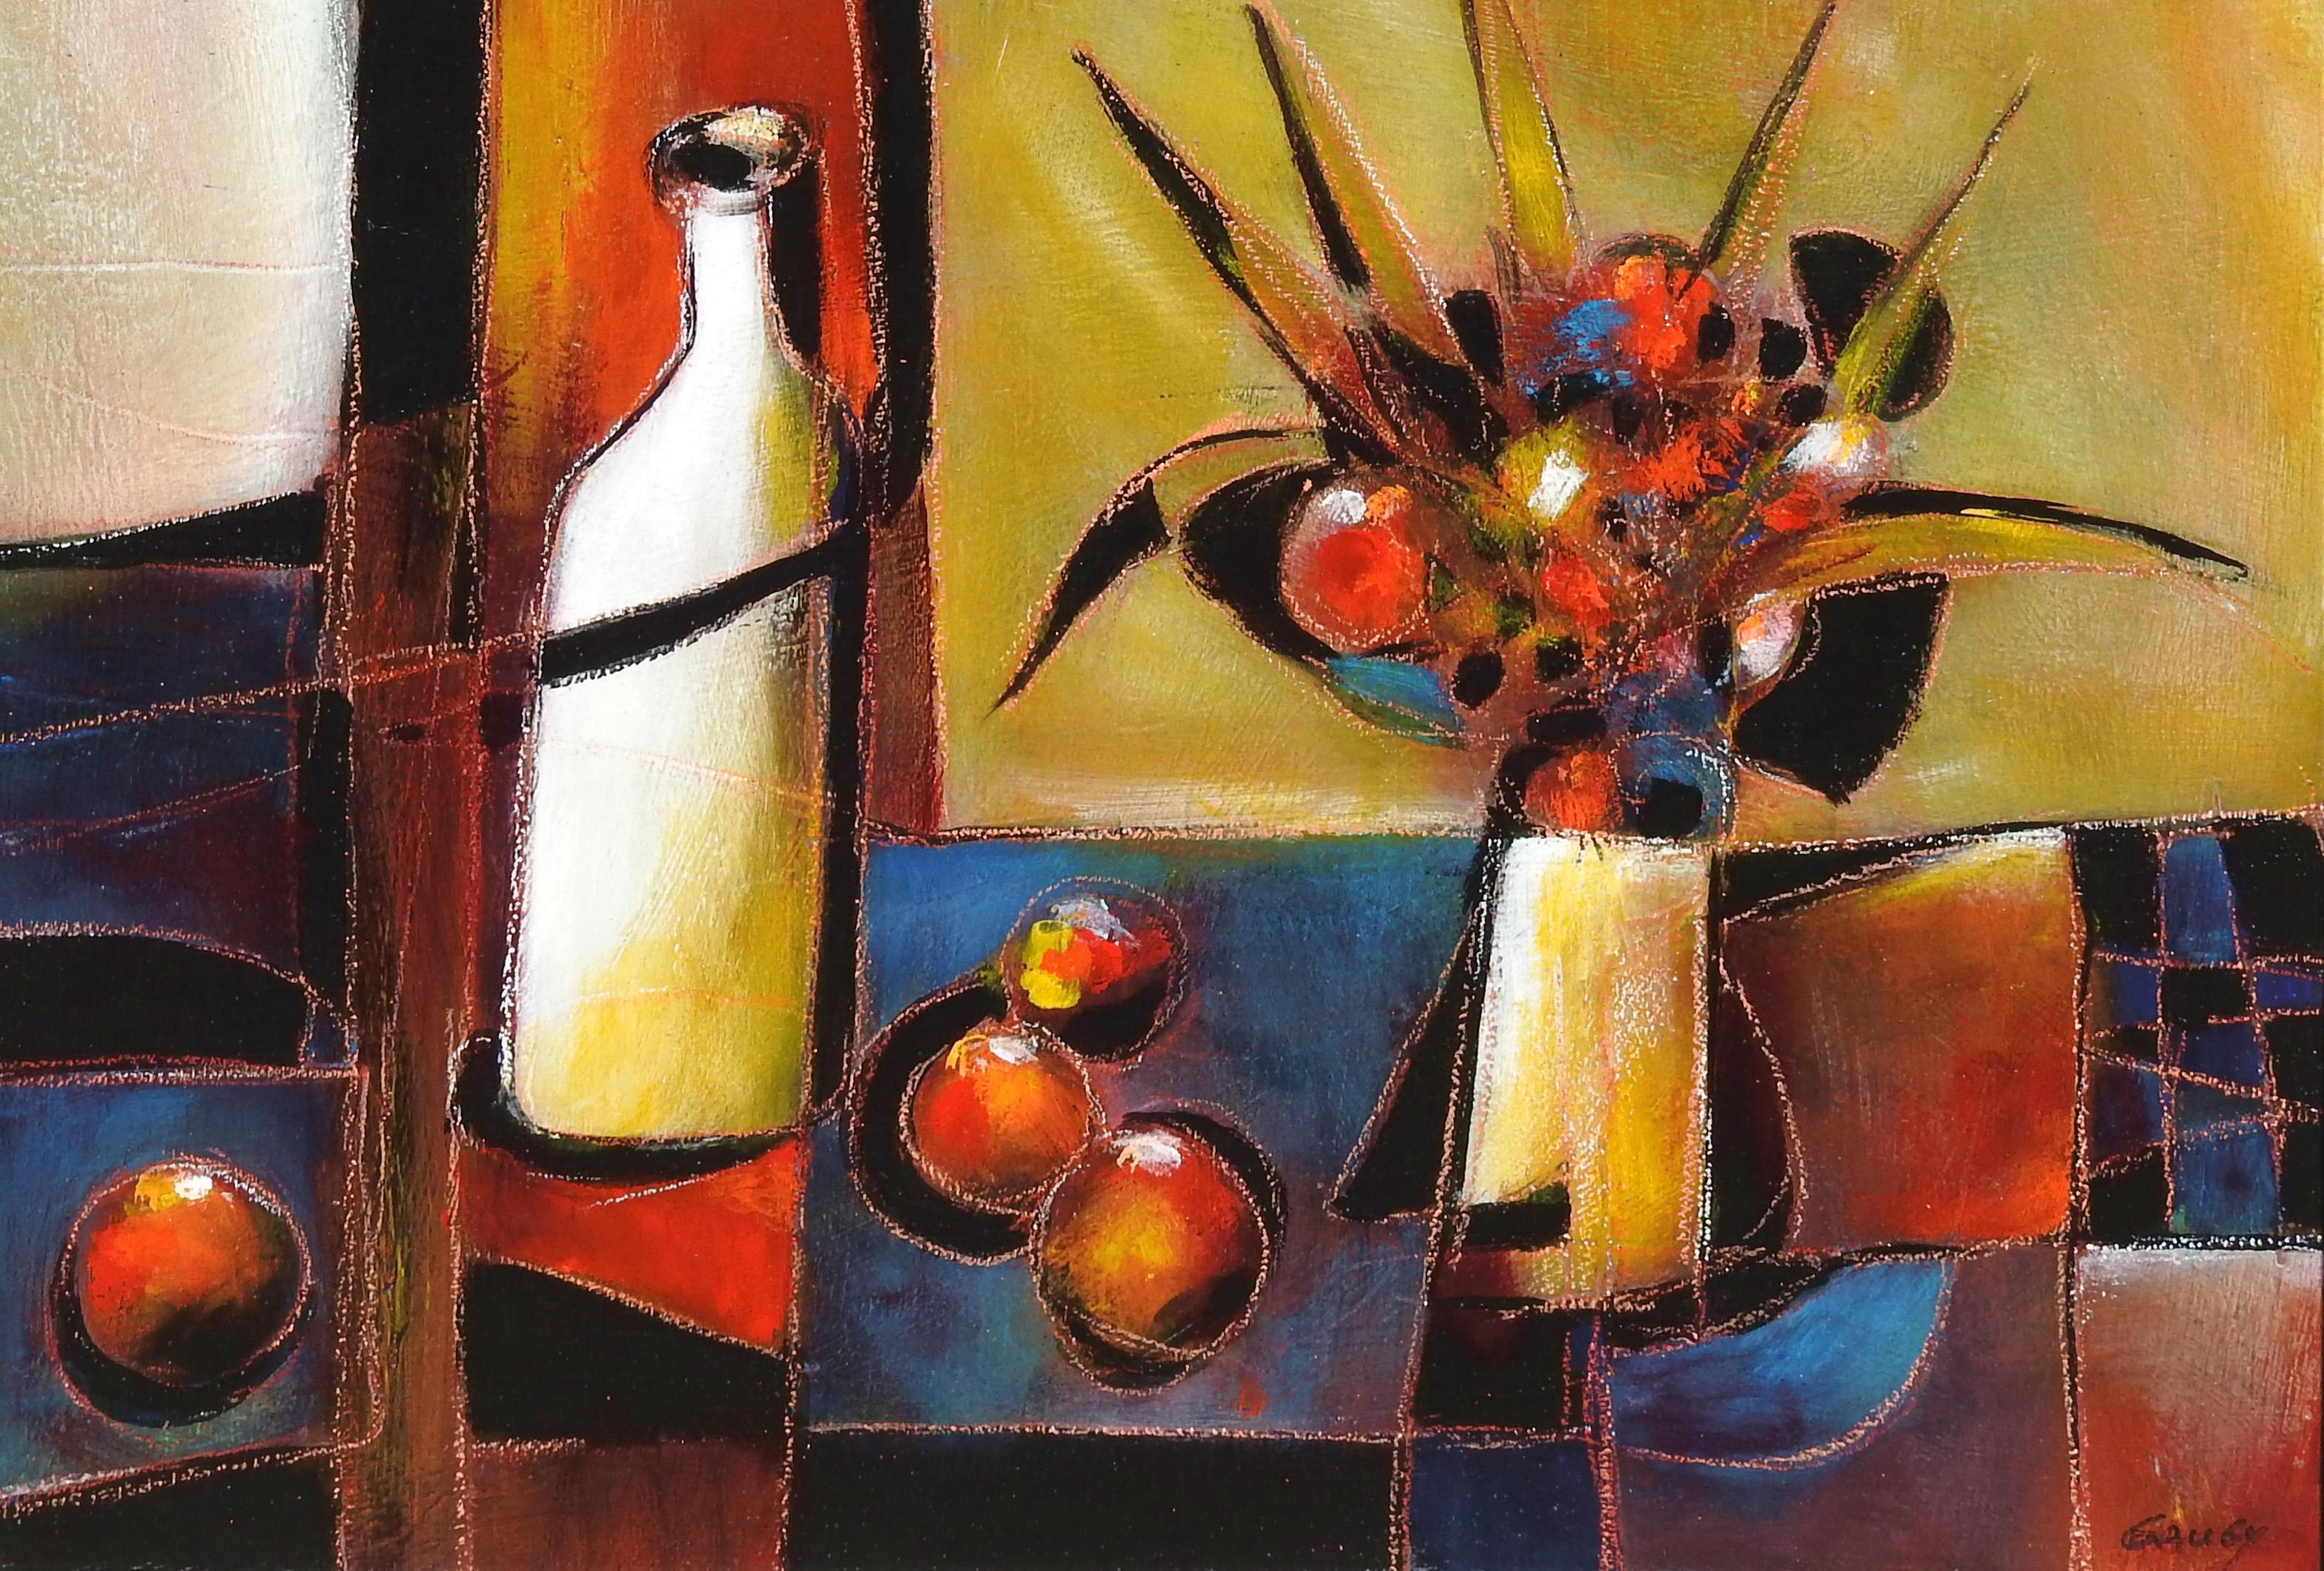 "Reflets", Jean-Claude Gaugy, Oil on Board, French, Contemporary, Still Life